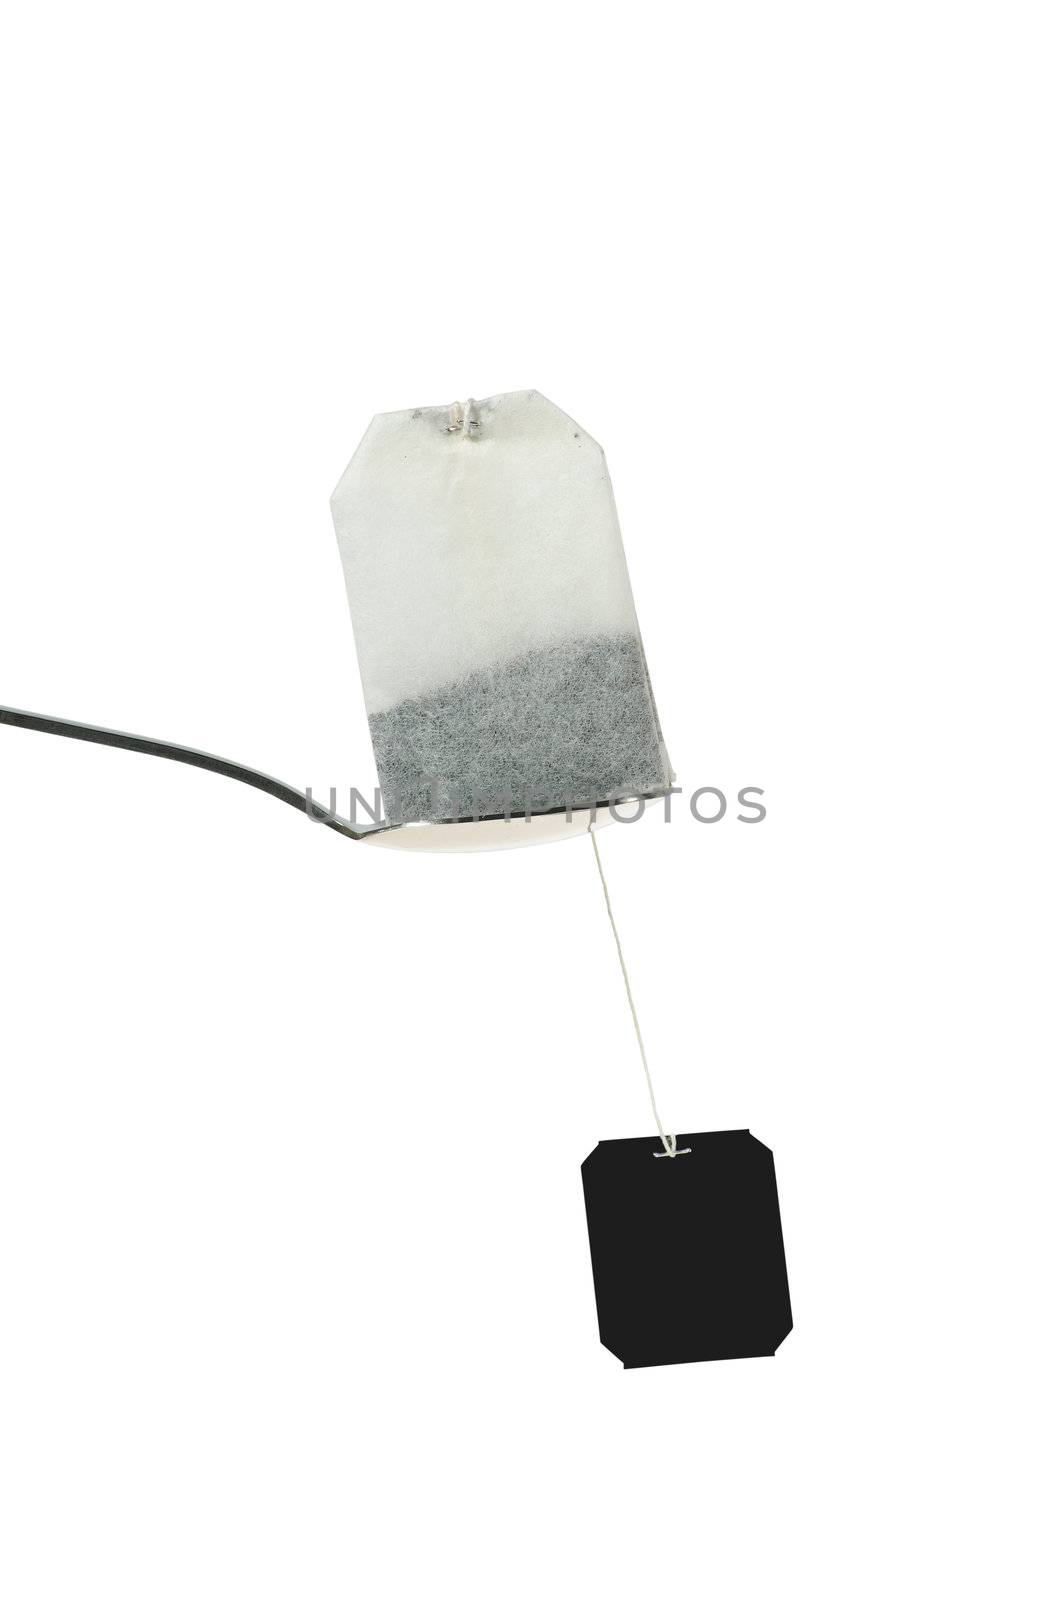 teabag with spoon isolated on white